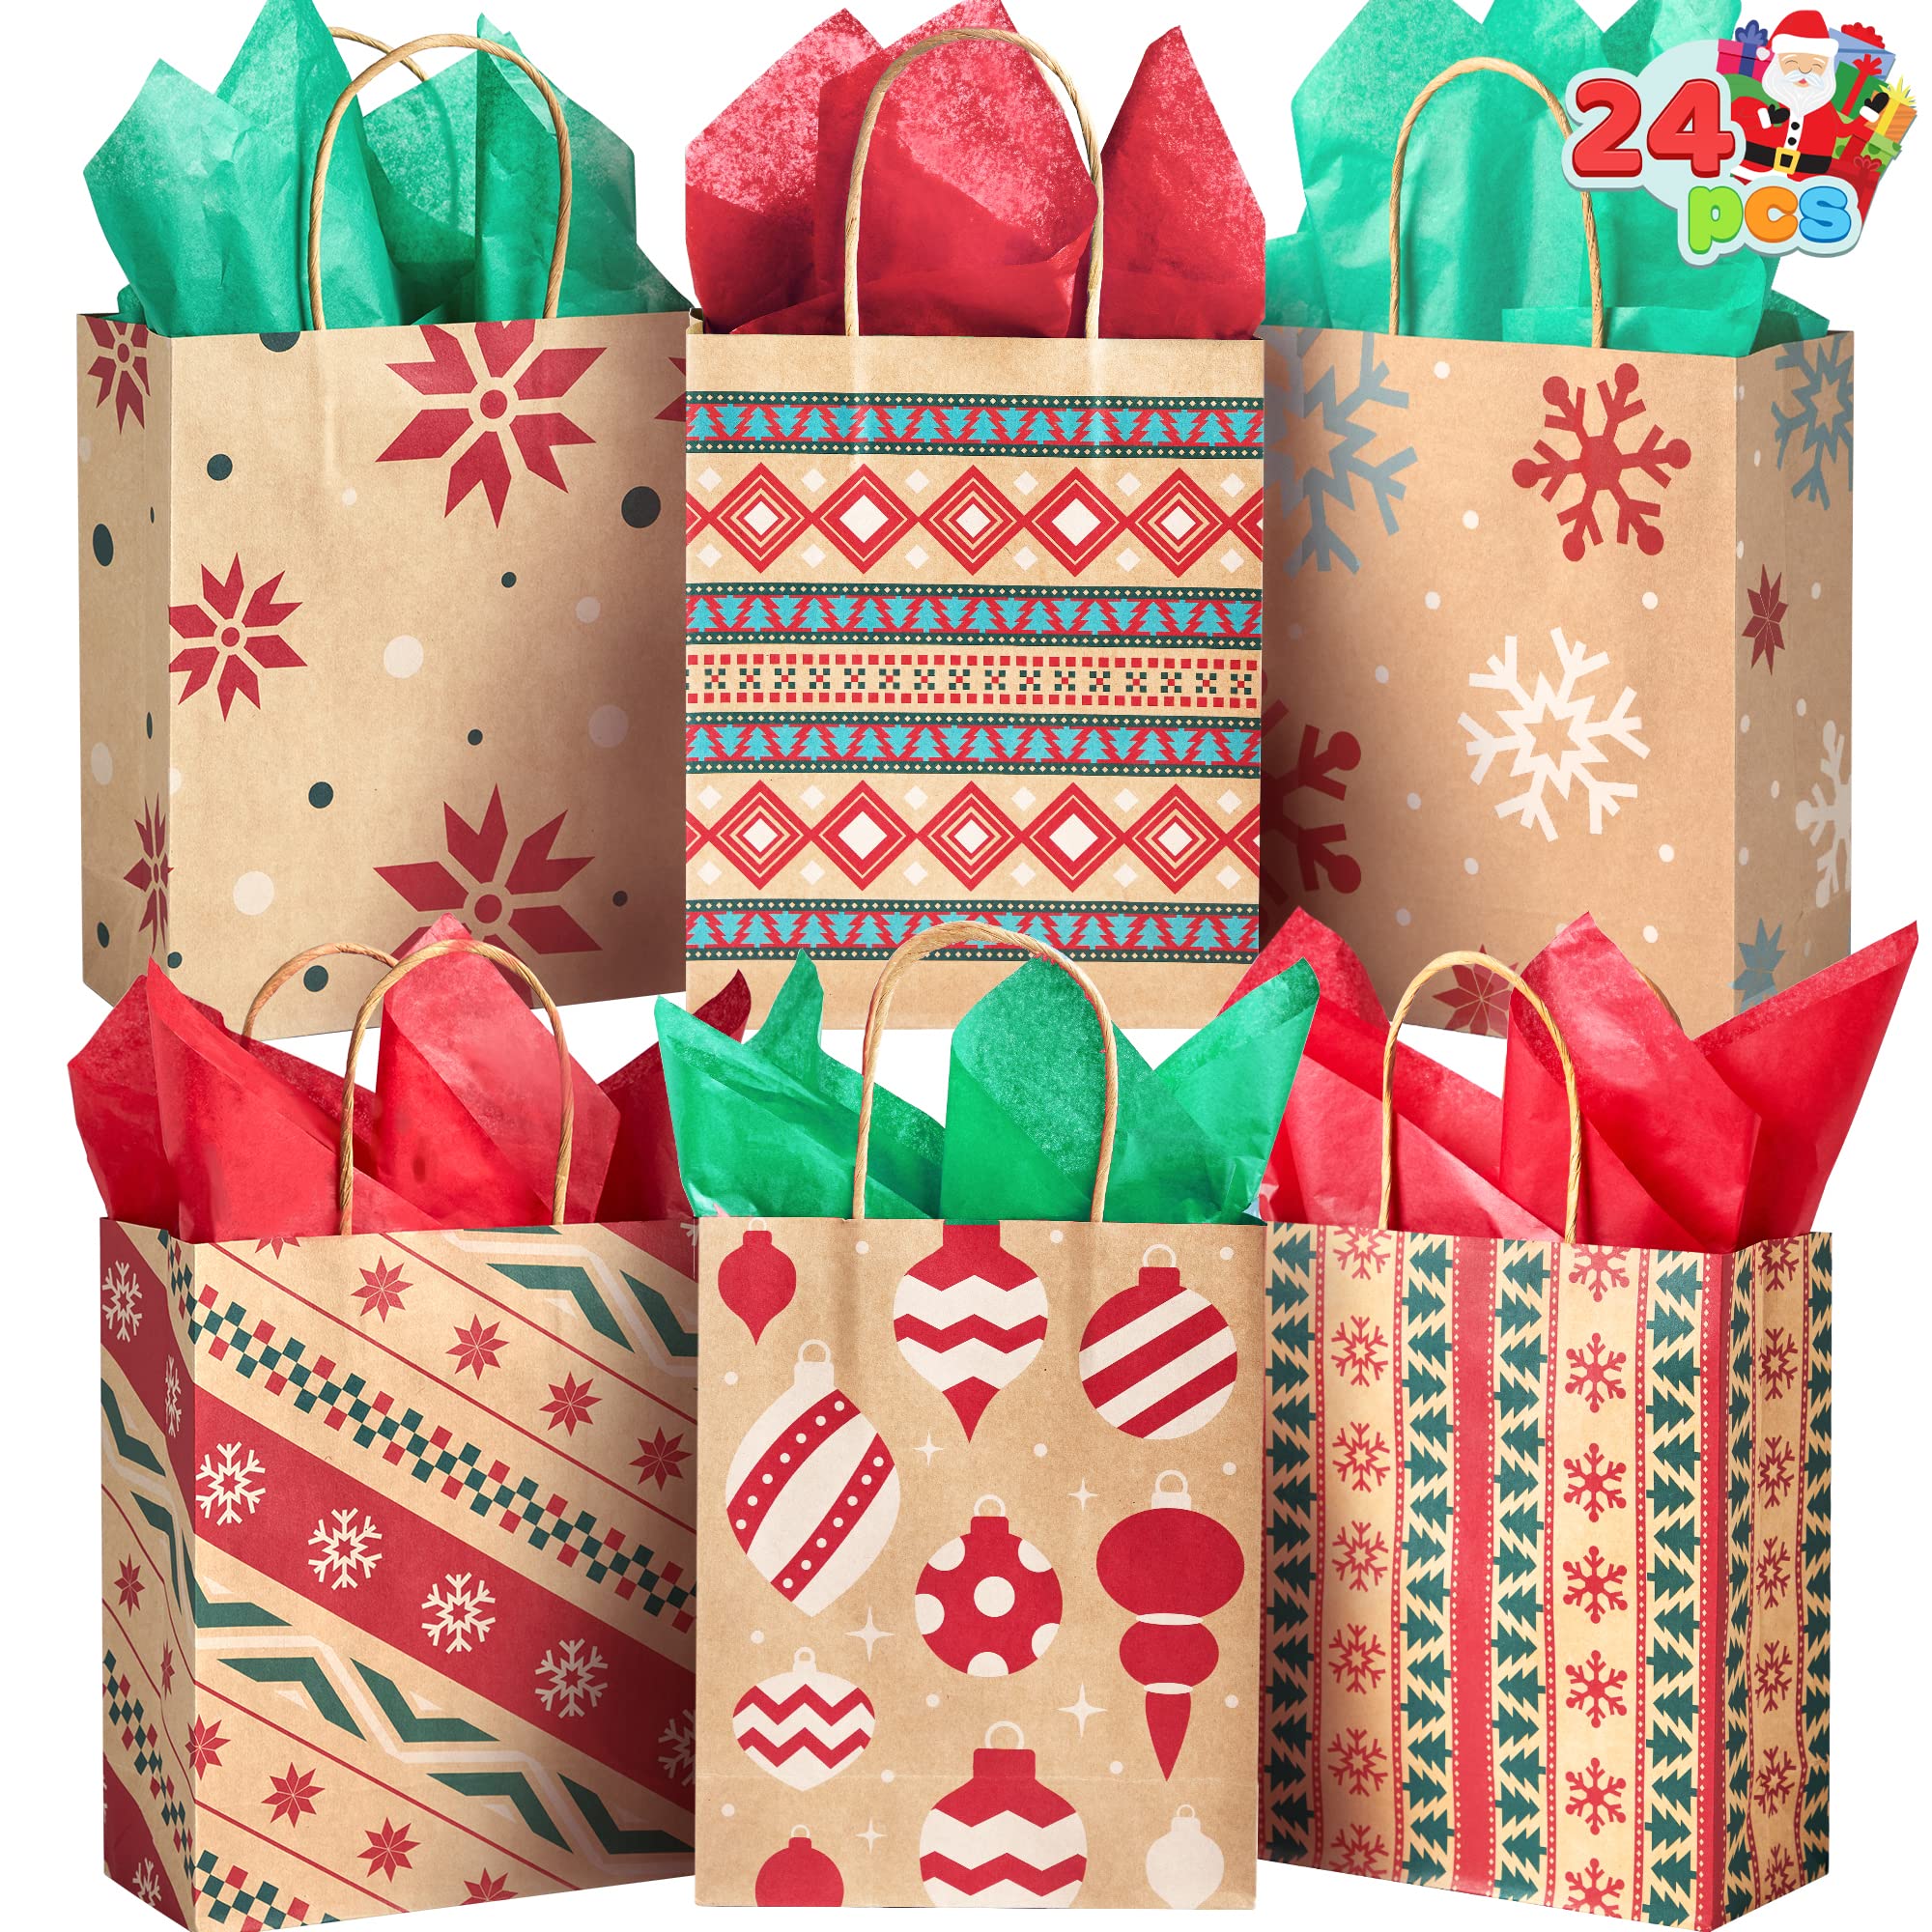 JOYIN 24 Christmas Kraft Gift Bags for Holiday Paper Gift Bags, Christmas Goody Bags, Xmas Gift Bags, Classrooms and Party Favors (9 x 7.3 x 3.3